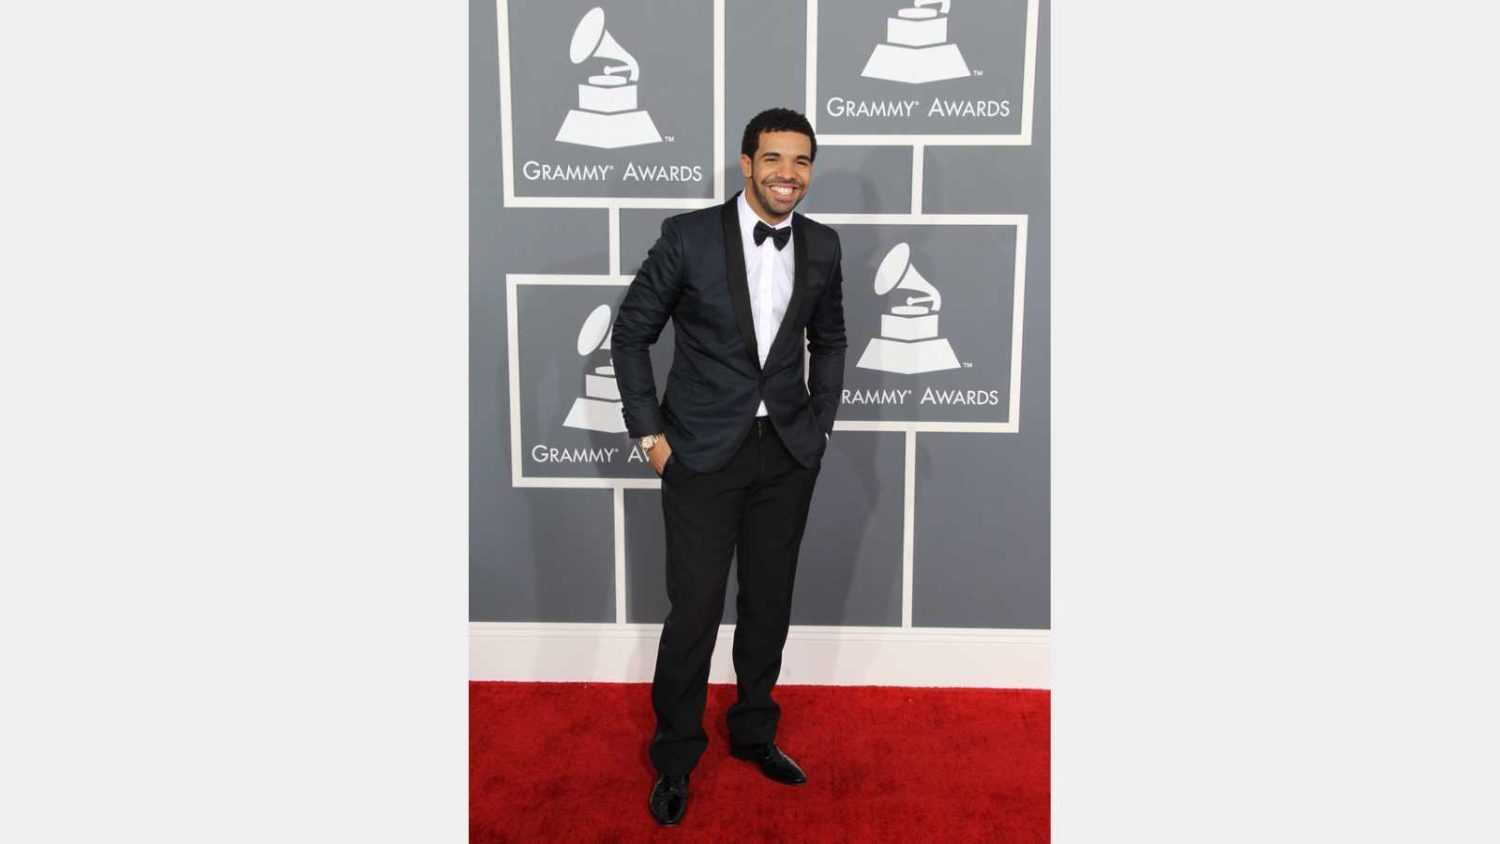 LOS ANGELES - FEB 10: Drake arrives at the 55th Annual Grammy Awards at the Staples Center on February 10, 2013 in Los Angeles, CA